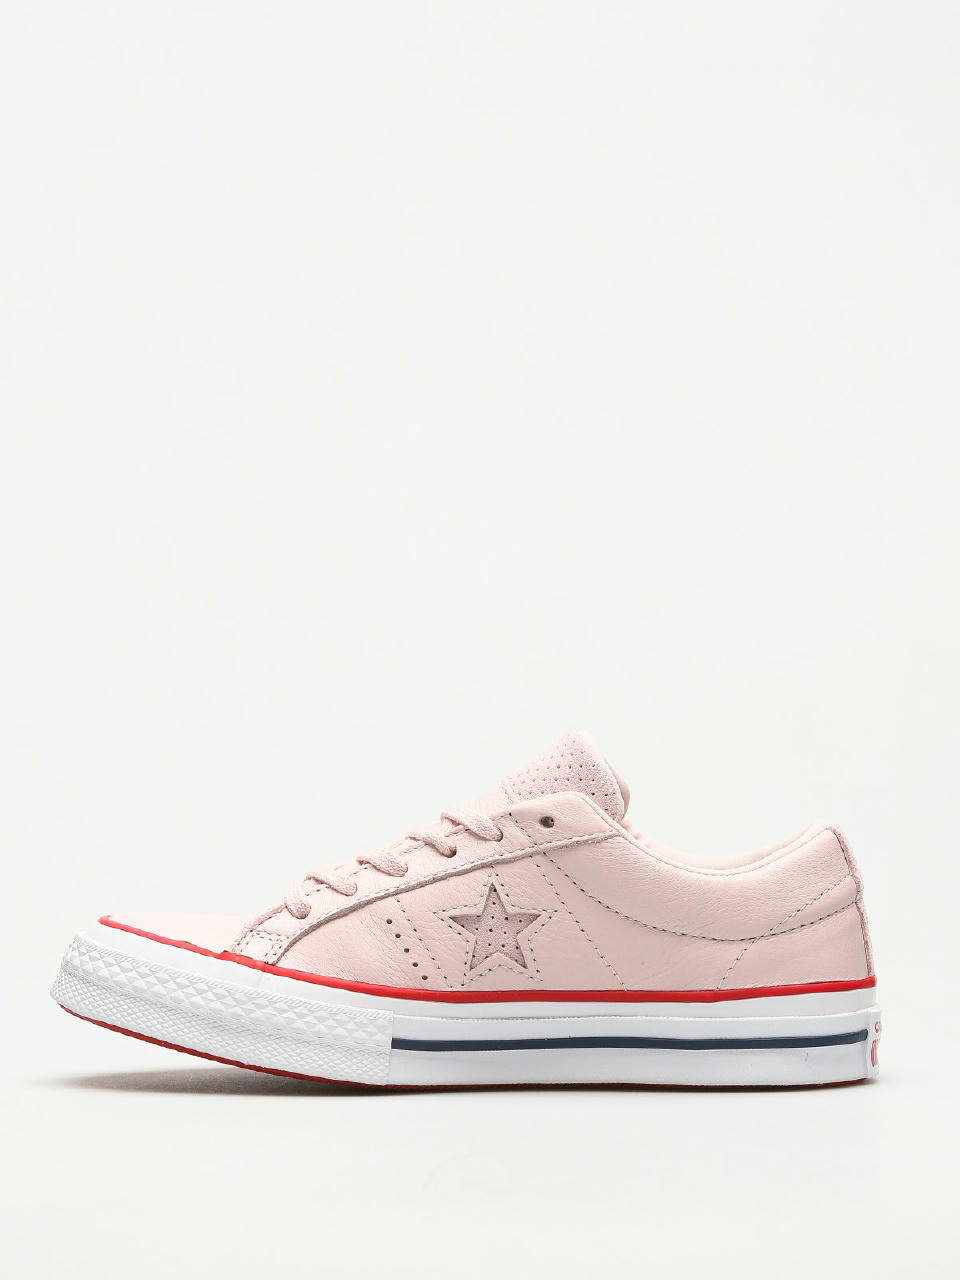 Boty Converse One Star rose/gym red/white)